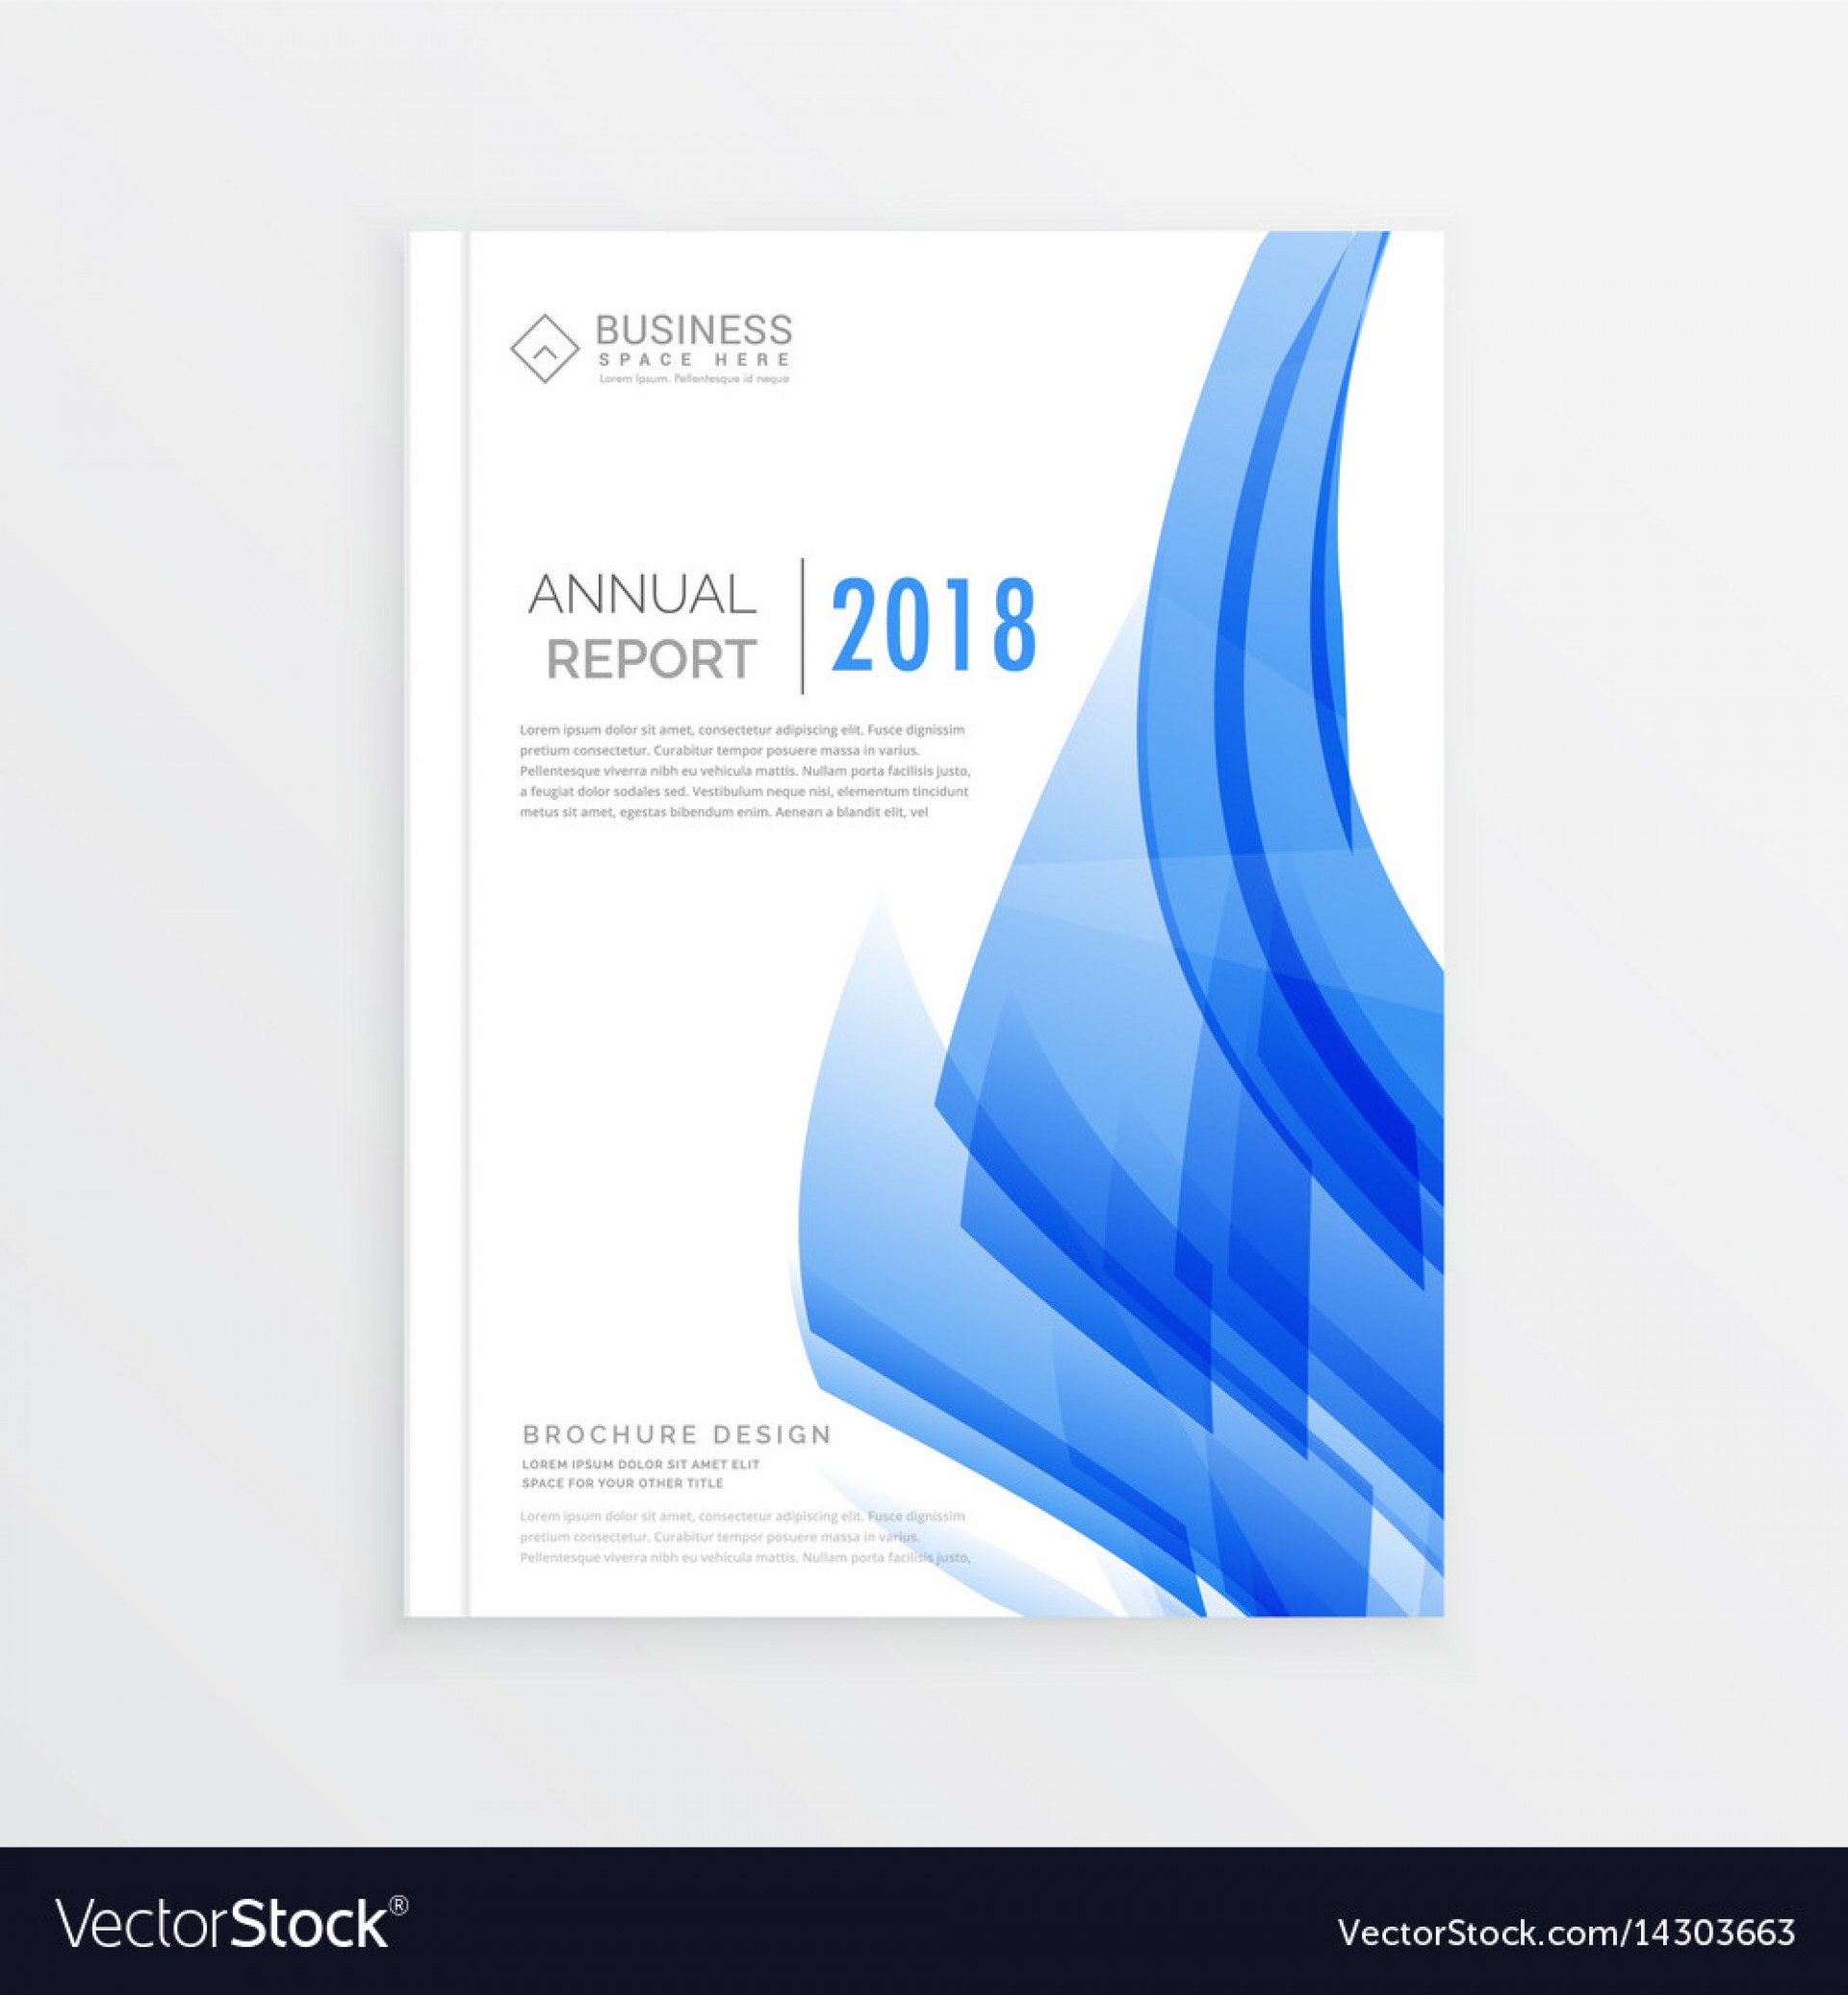 011 Template Ideas Report Cover Page Marvelous Annual Throughout Report Cover Page Template Word